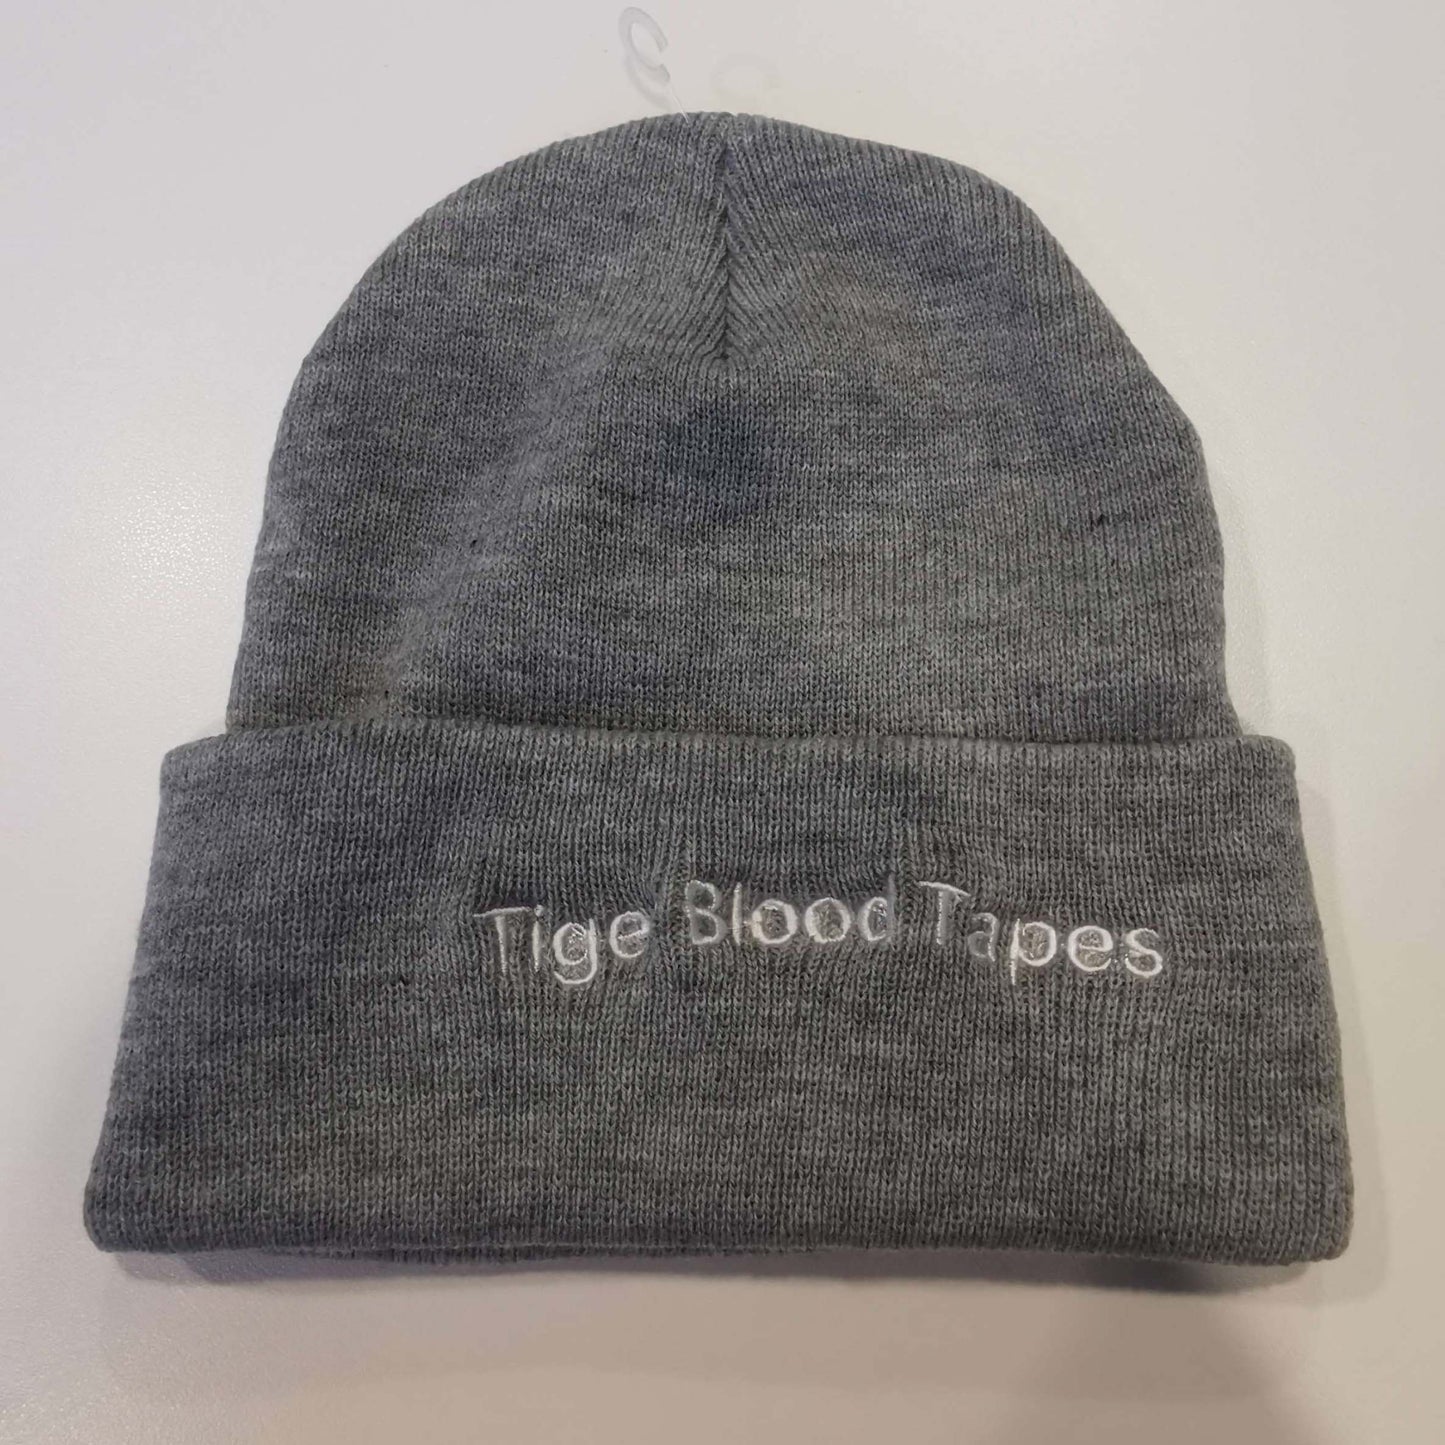 Tiger Blood Tapes Embroidered Beanie